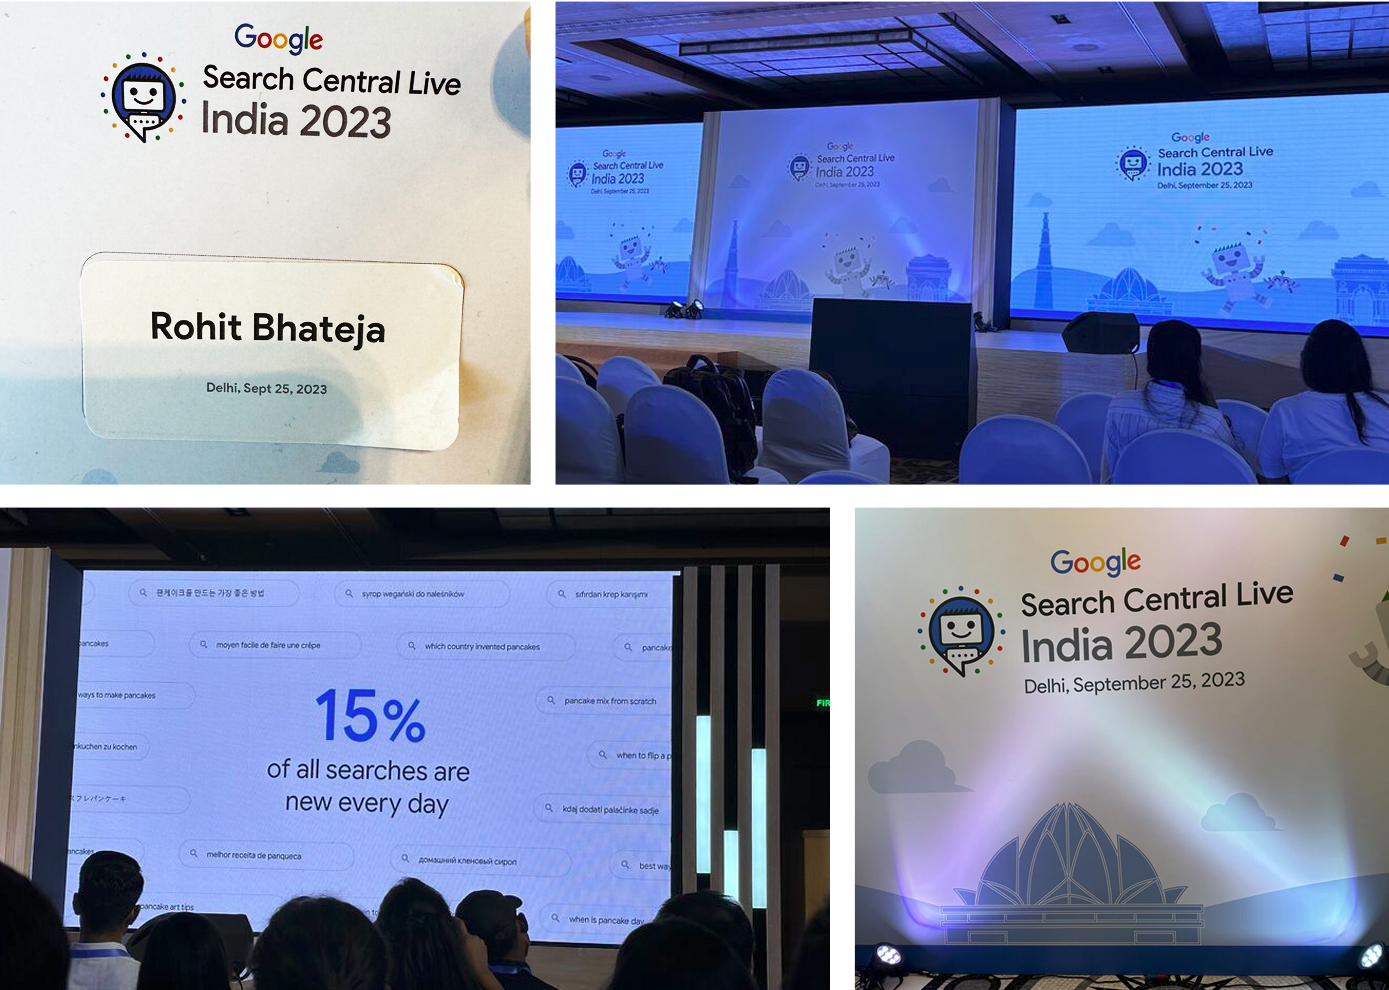 Search Central Live event in India